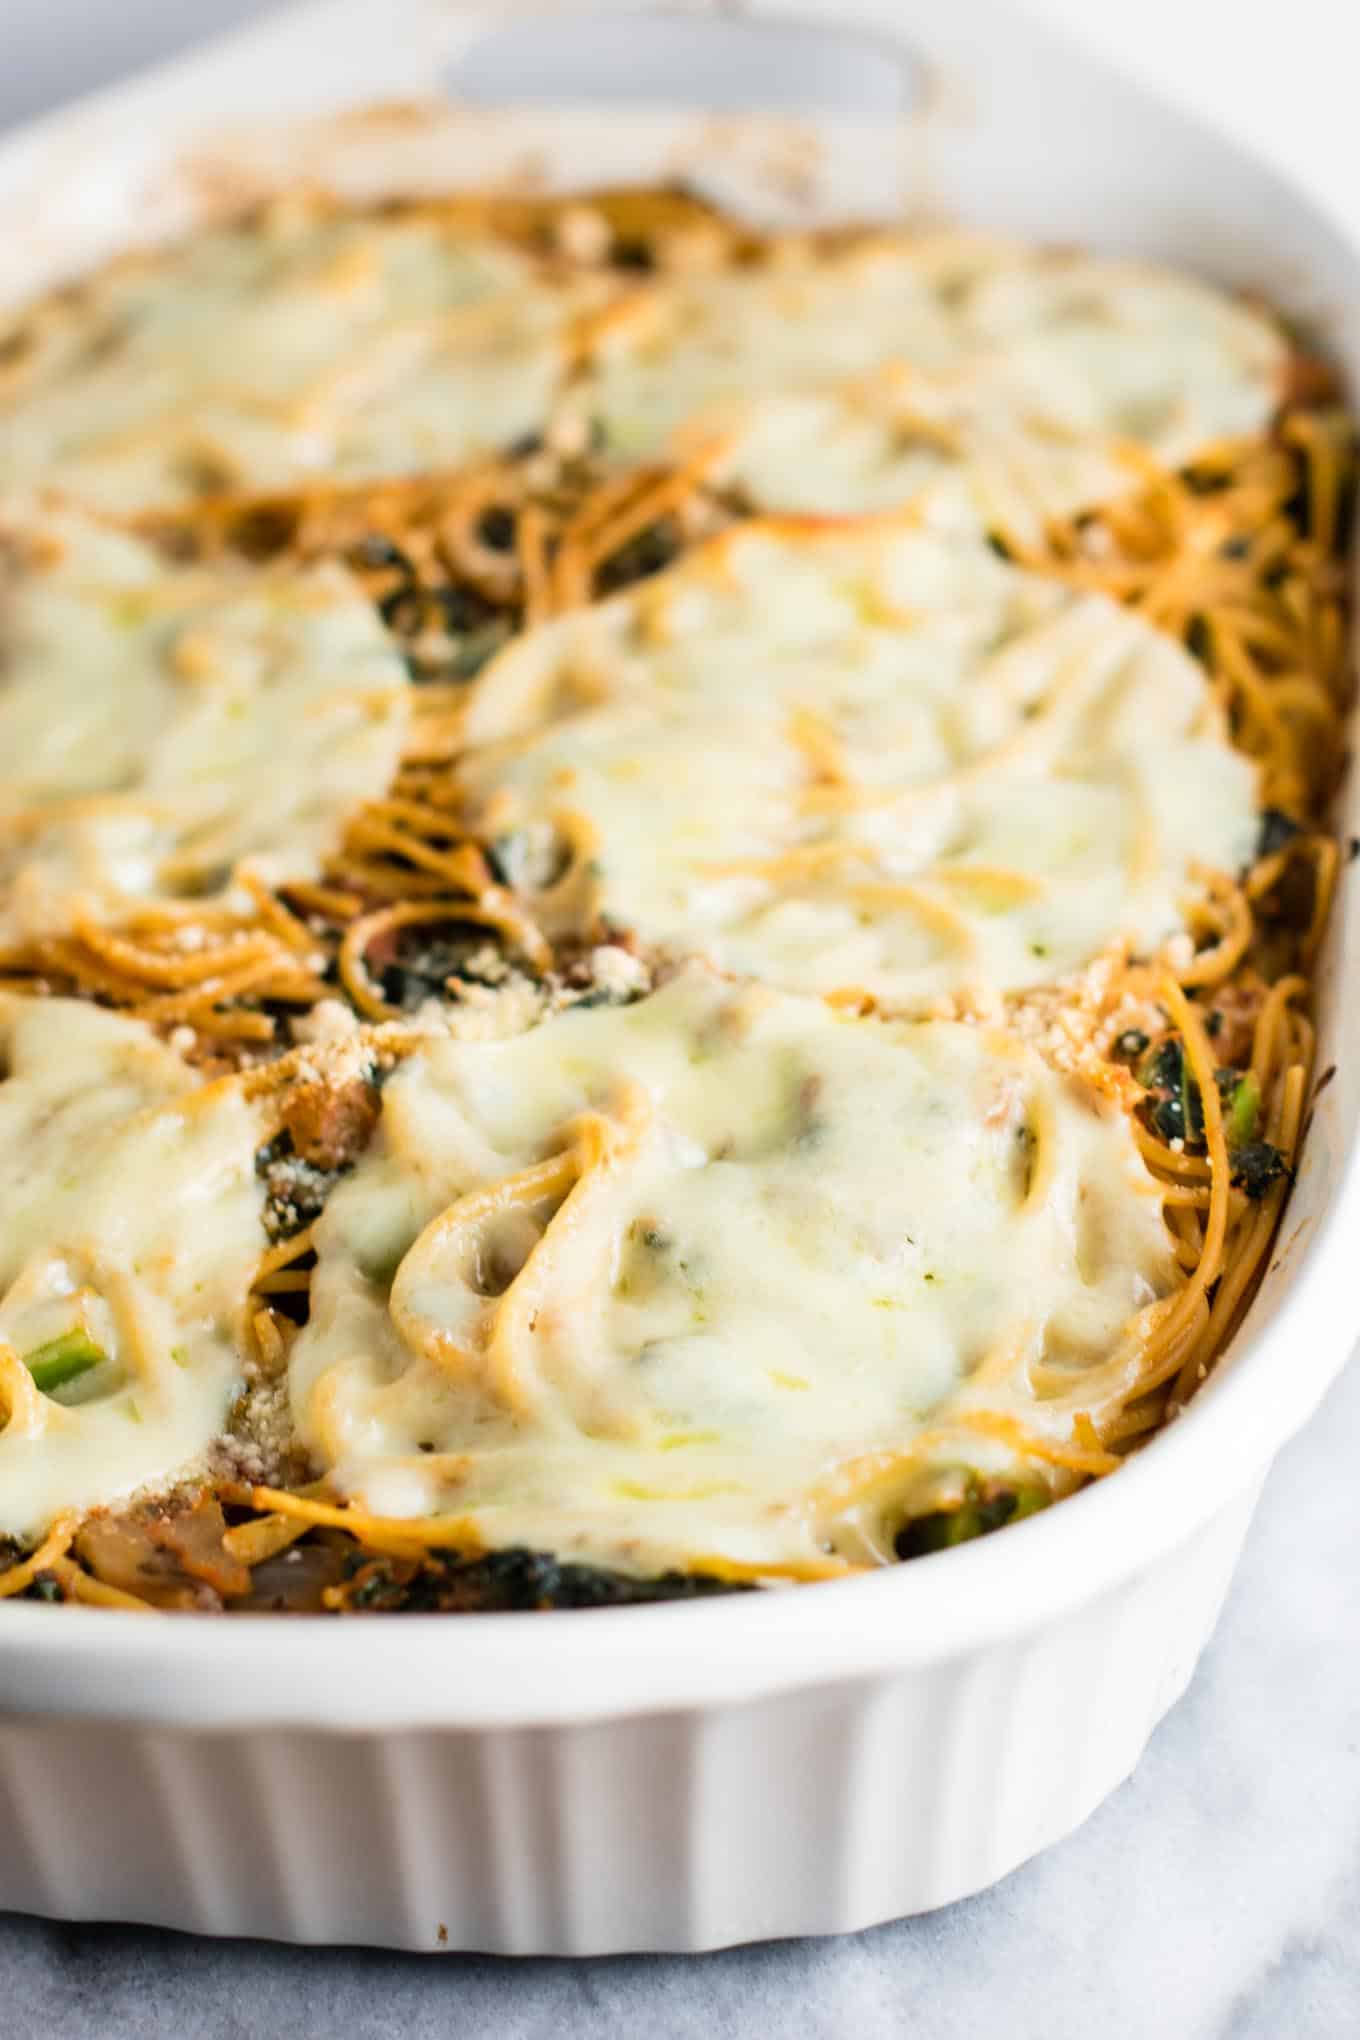 Healthy Baked Spaghetti Recipe – a healthier veggie packed way to get your pasta fix. Family friendly + easy weeknight dinner. #healthybakedspaghetti #vegetarian #dinner #bakedspaghetti #veggies